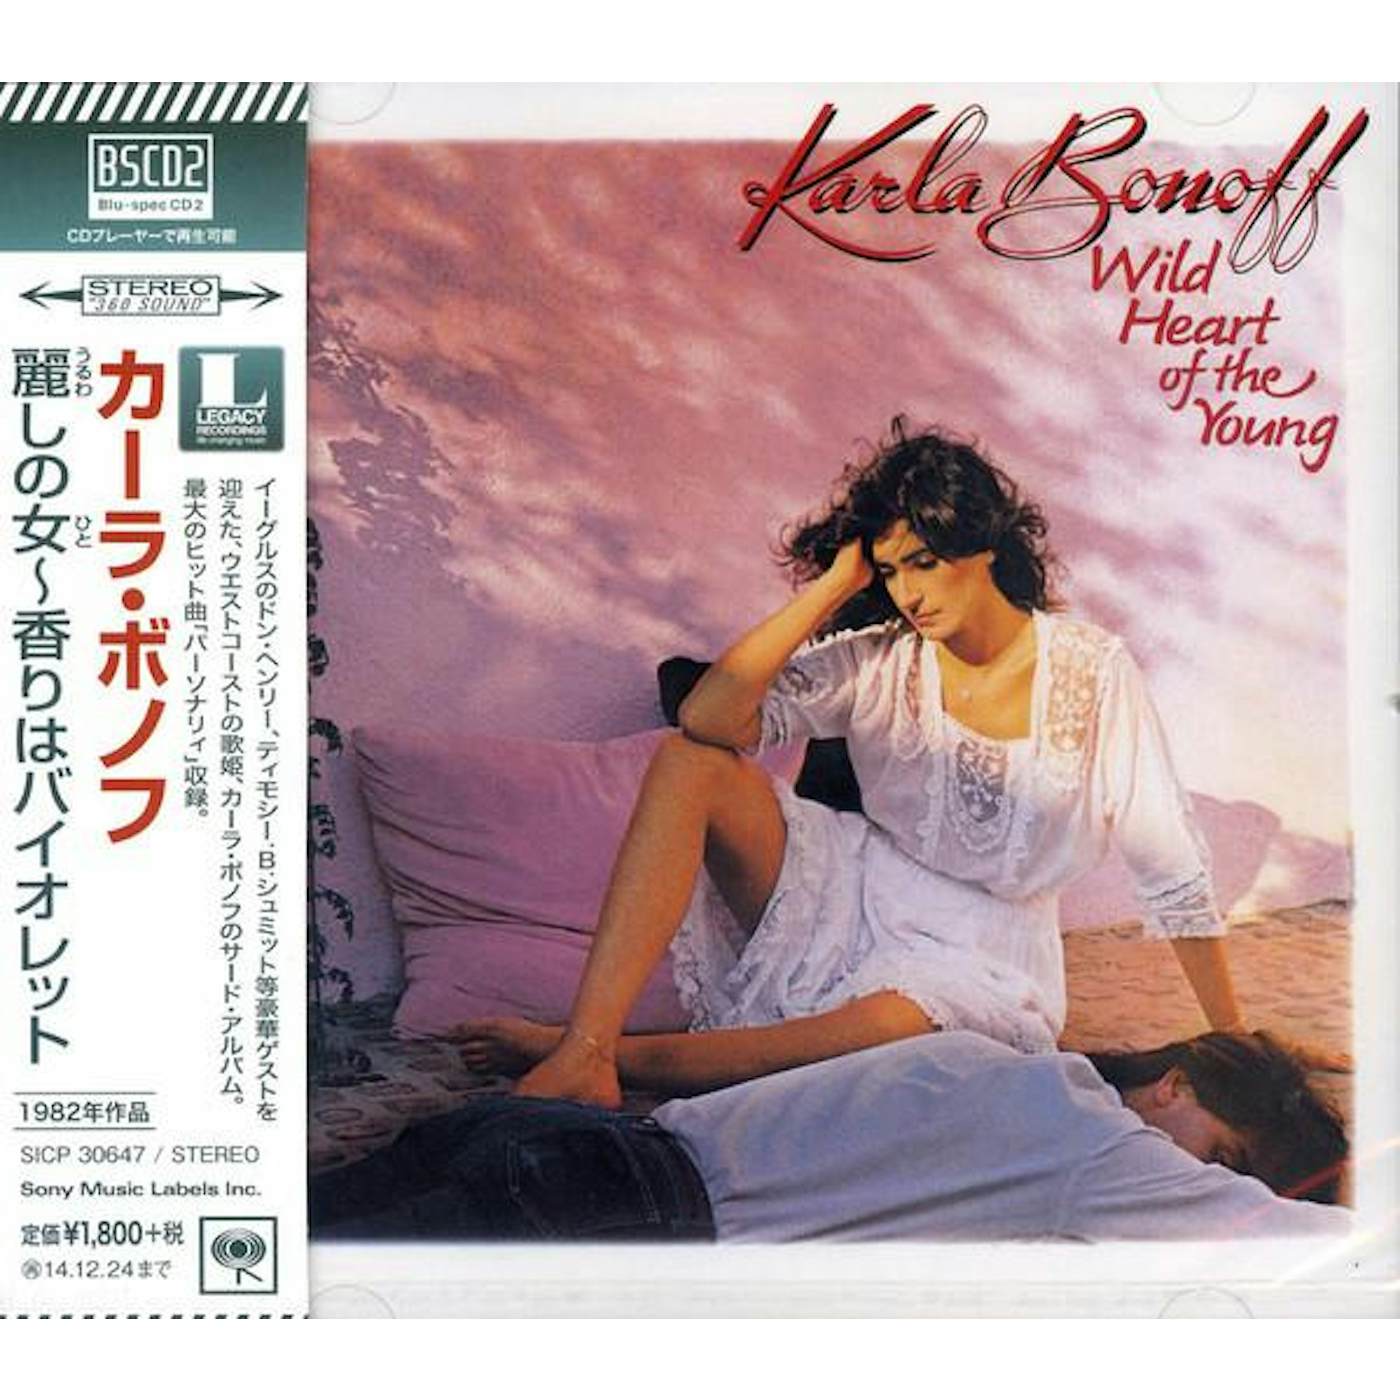 Karla Bonoff WILD HEART OF THE YOUNG CD